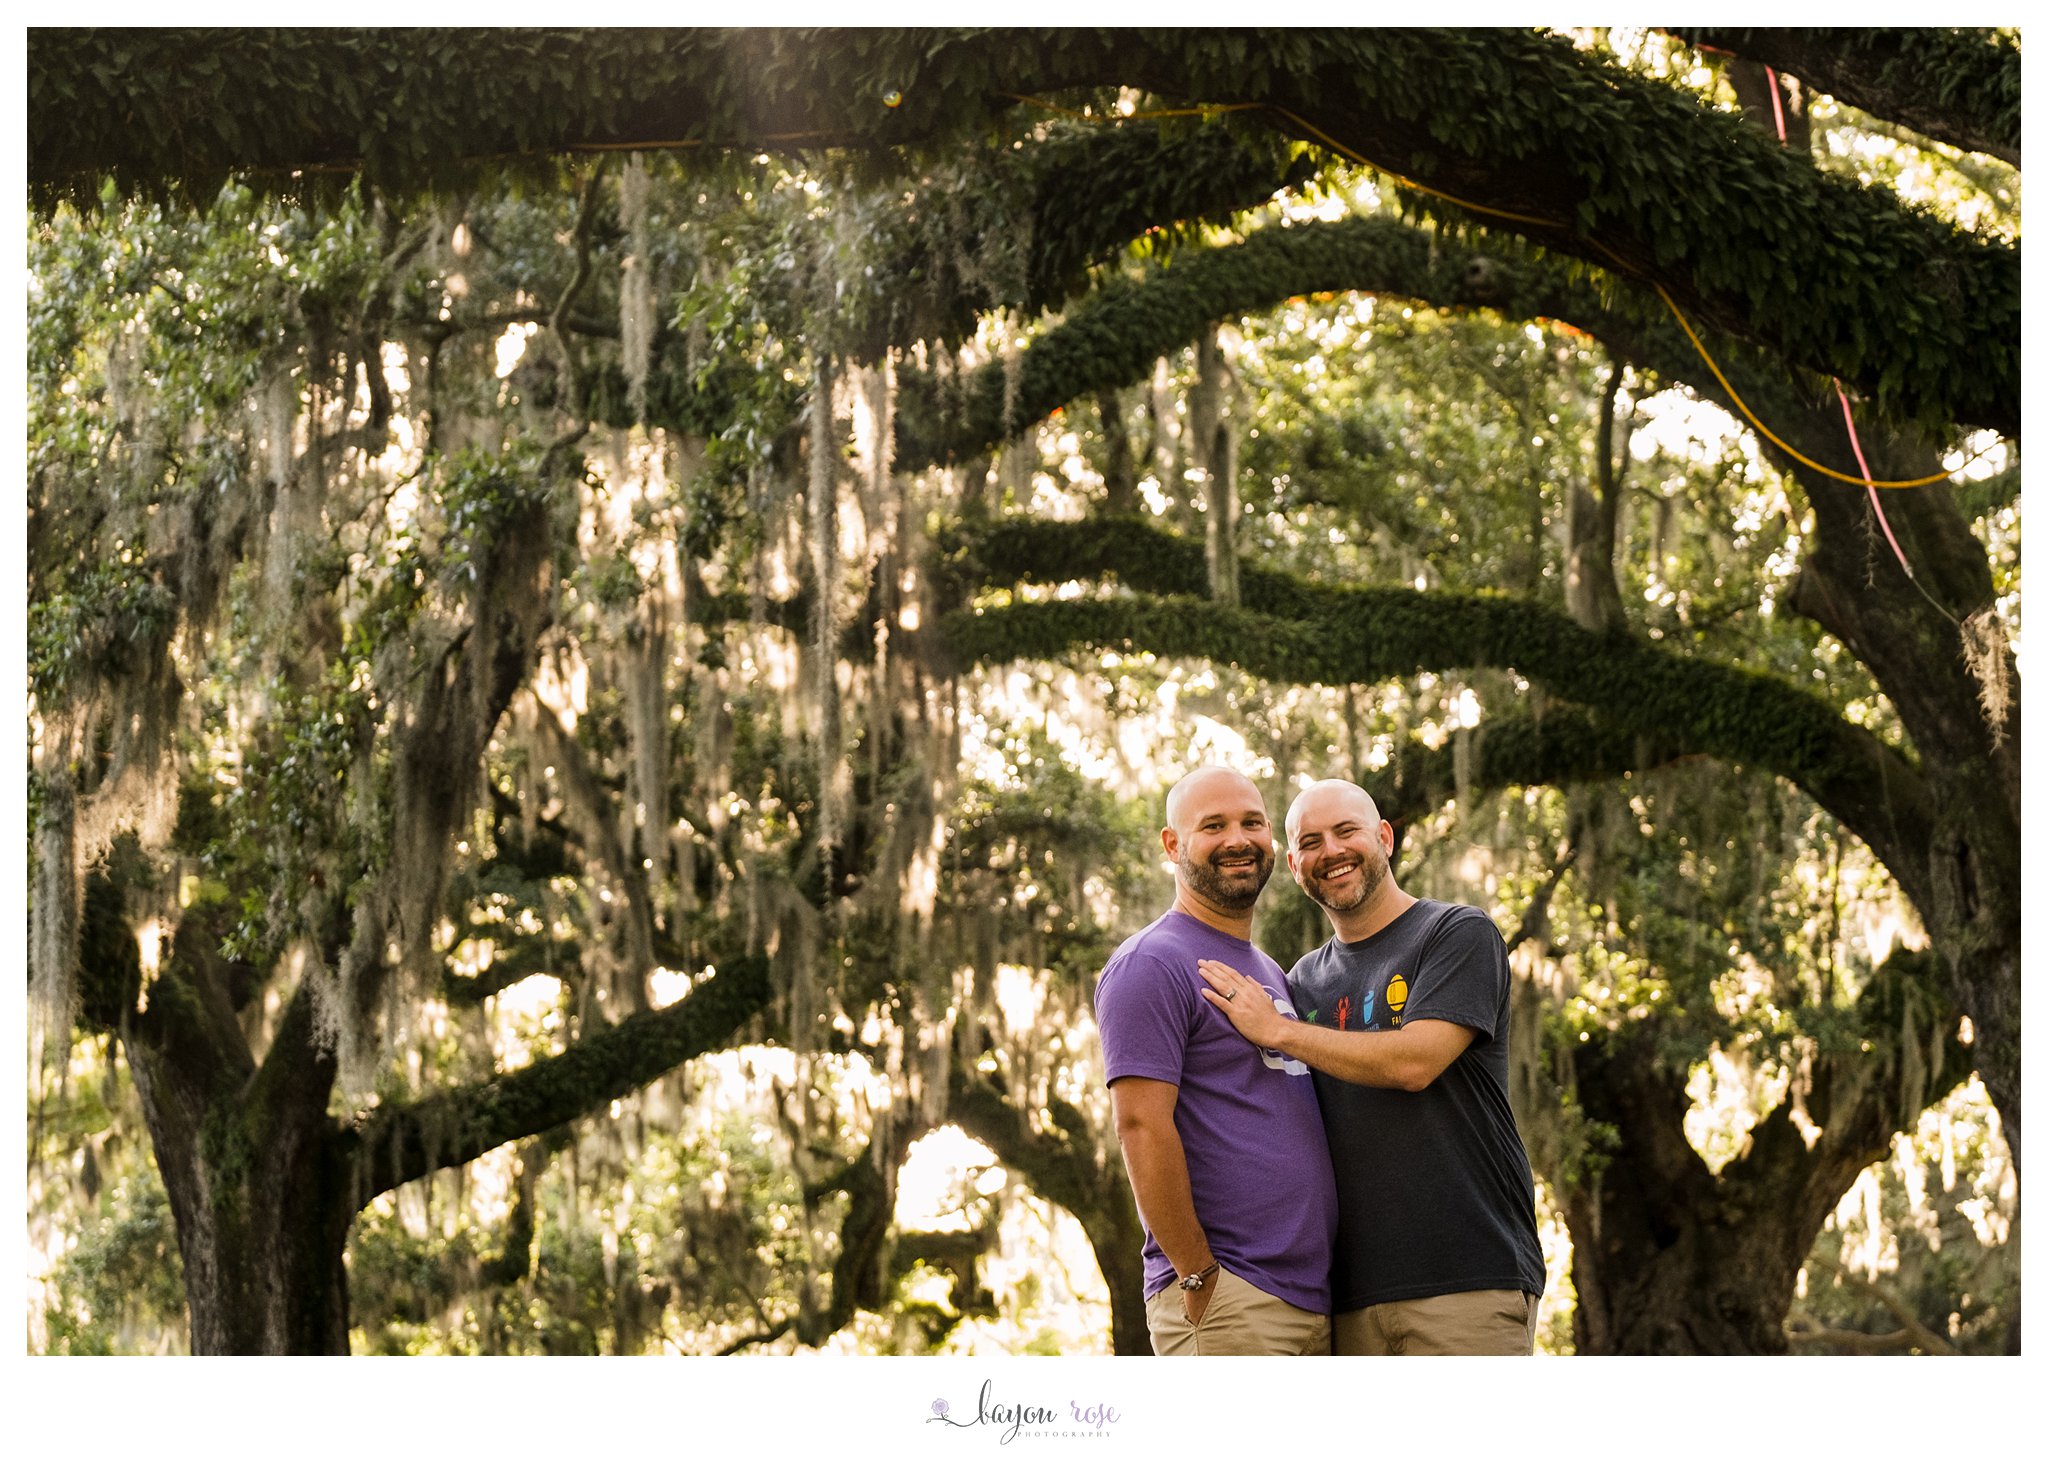 LGBTQ engagement photo under the oaks at City Park New Orleans